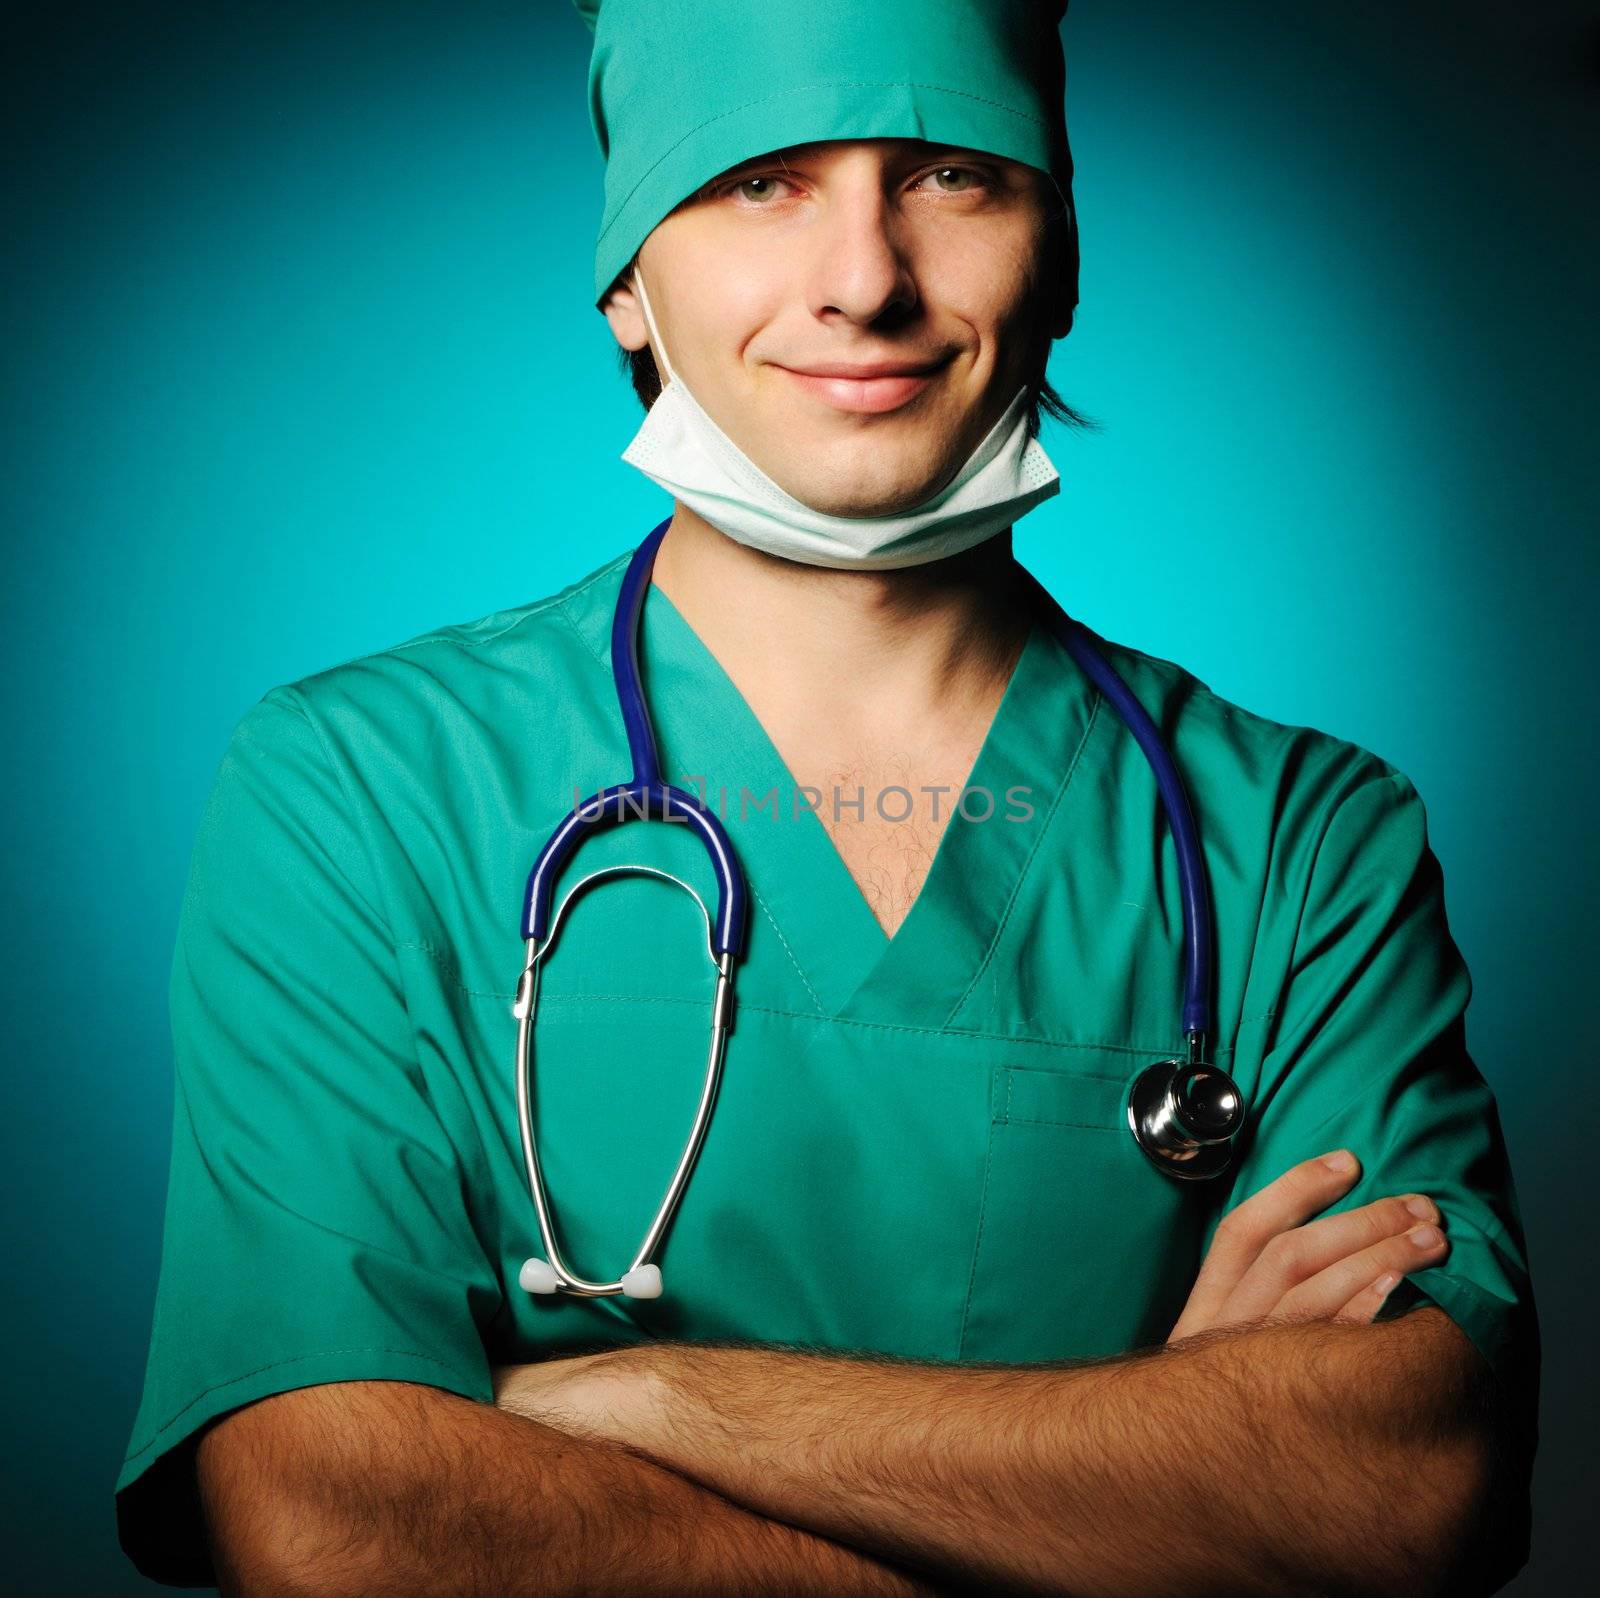 Surgeon with stethoscope over blue background